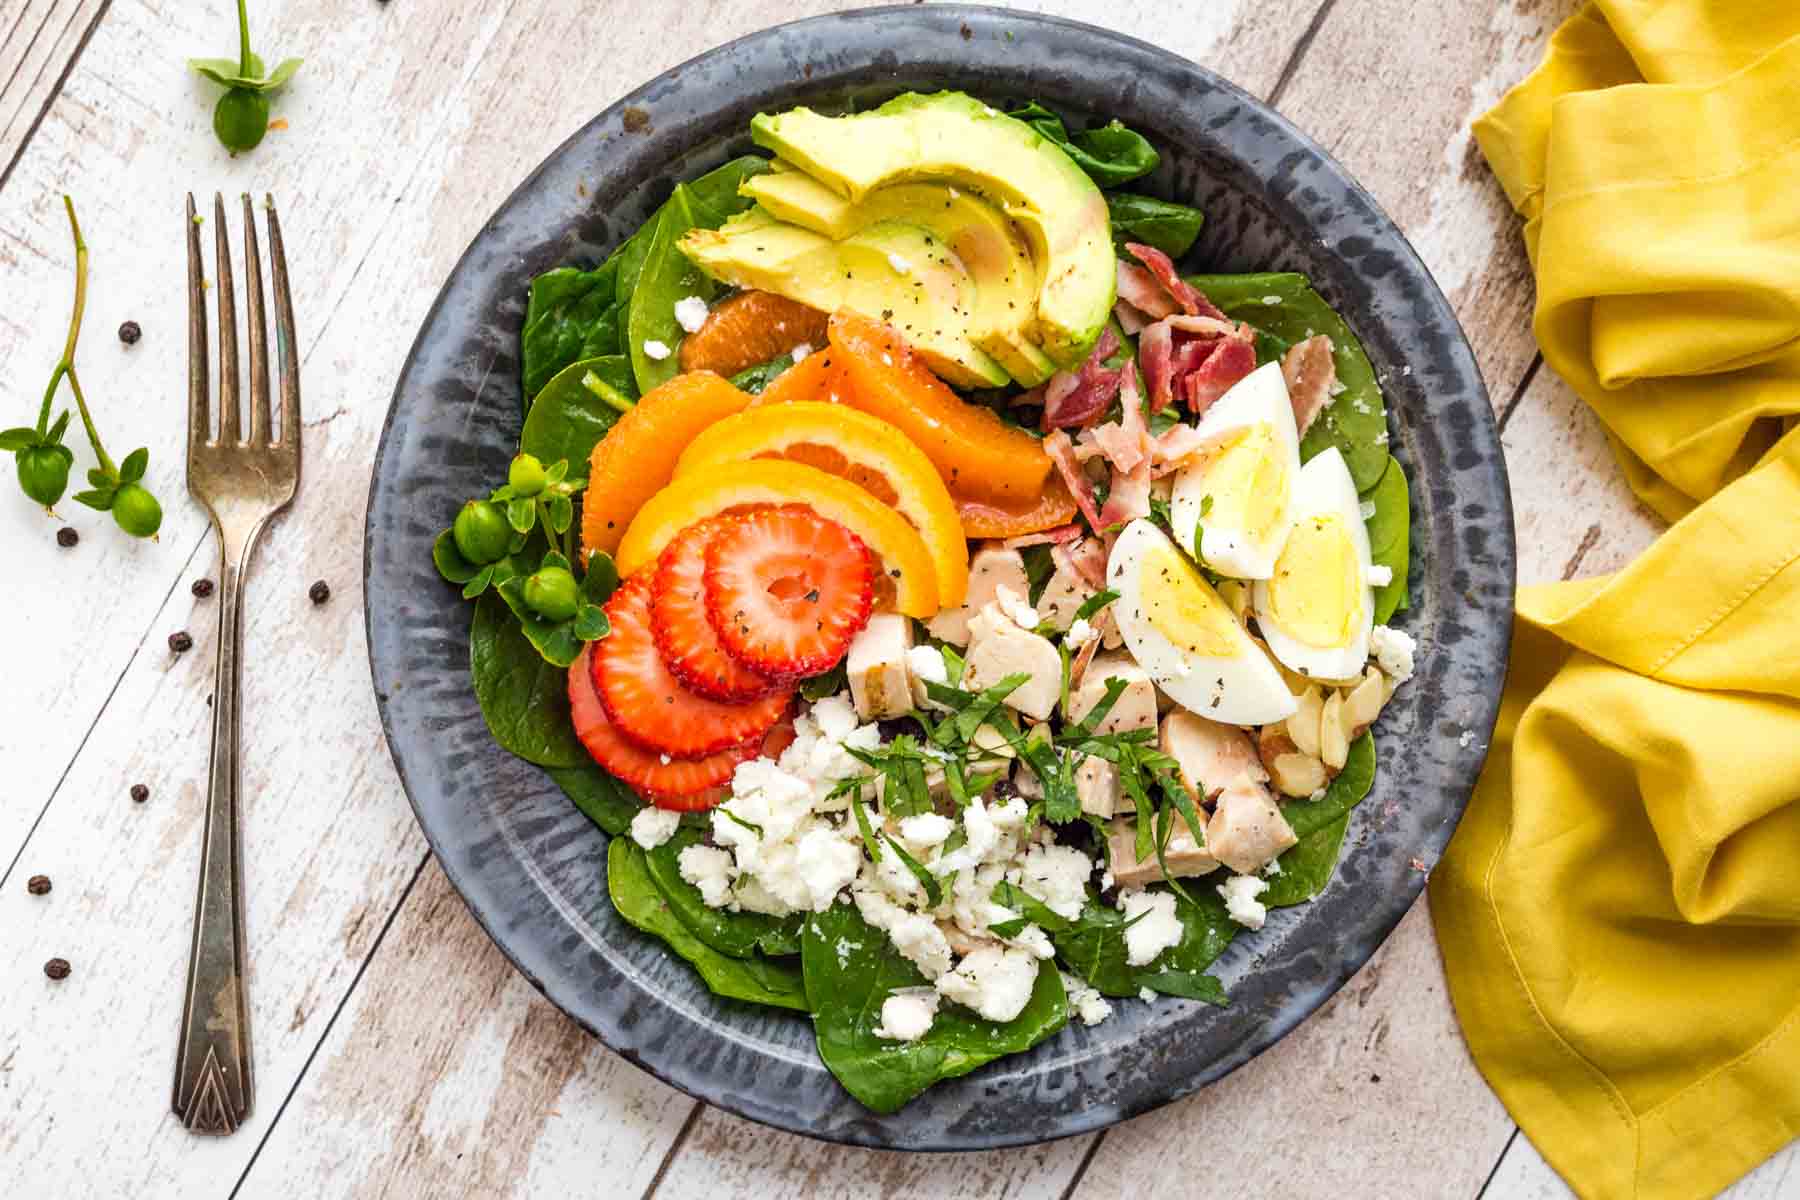 A bowl of strawberry spinach salad shows sliced avocado, strawberries, goat cheese, and hard boiled eggs.